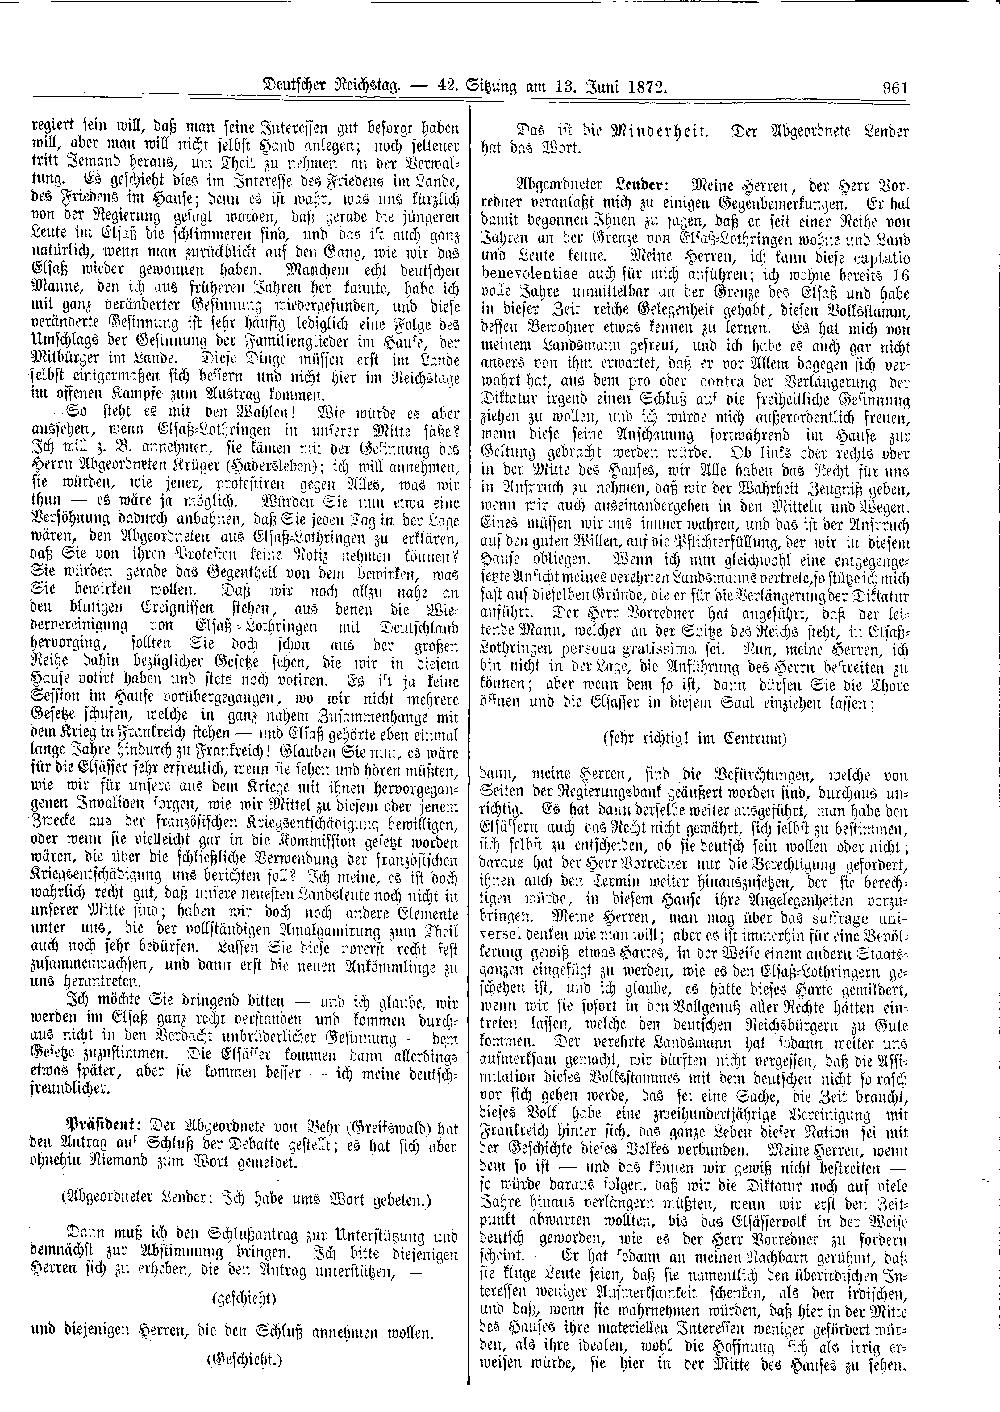 Scan of page 961